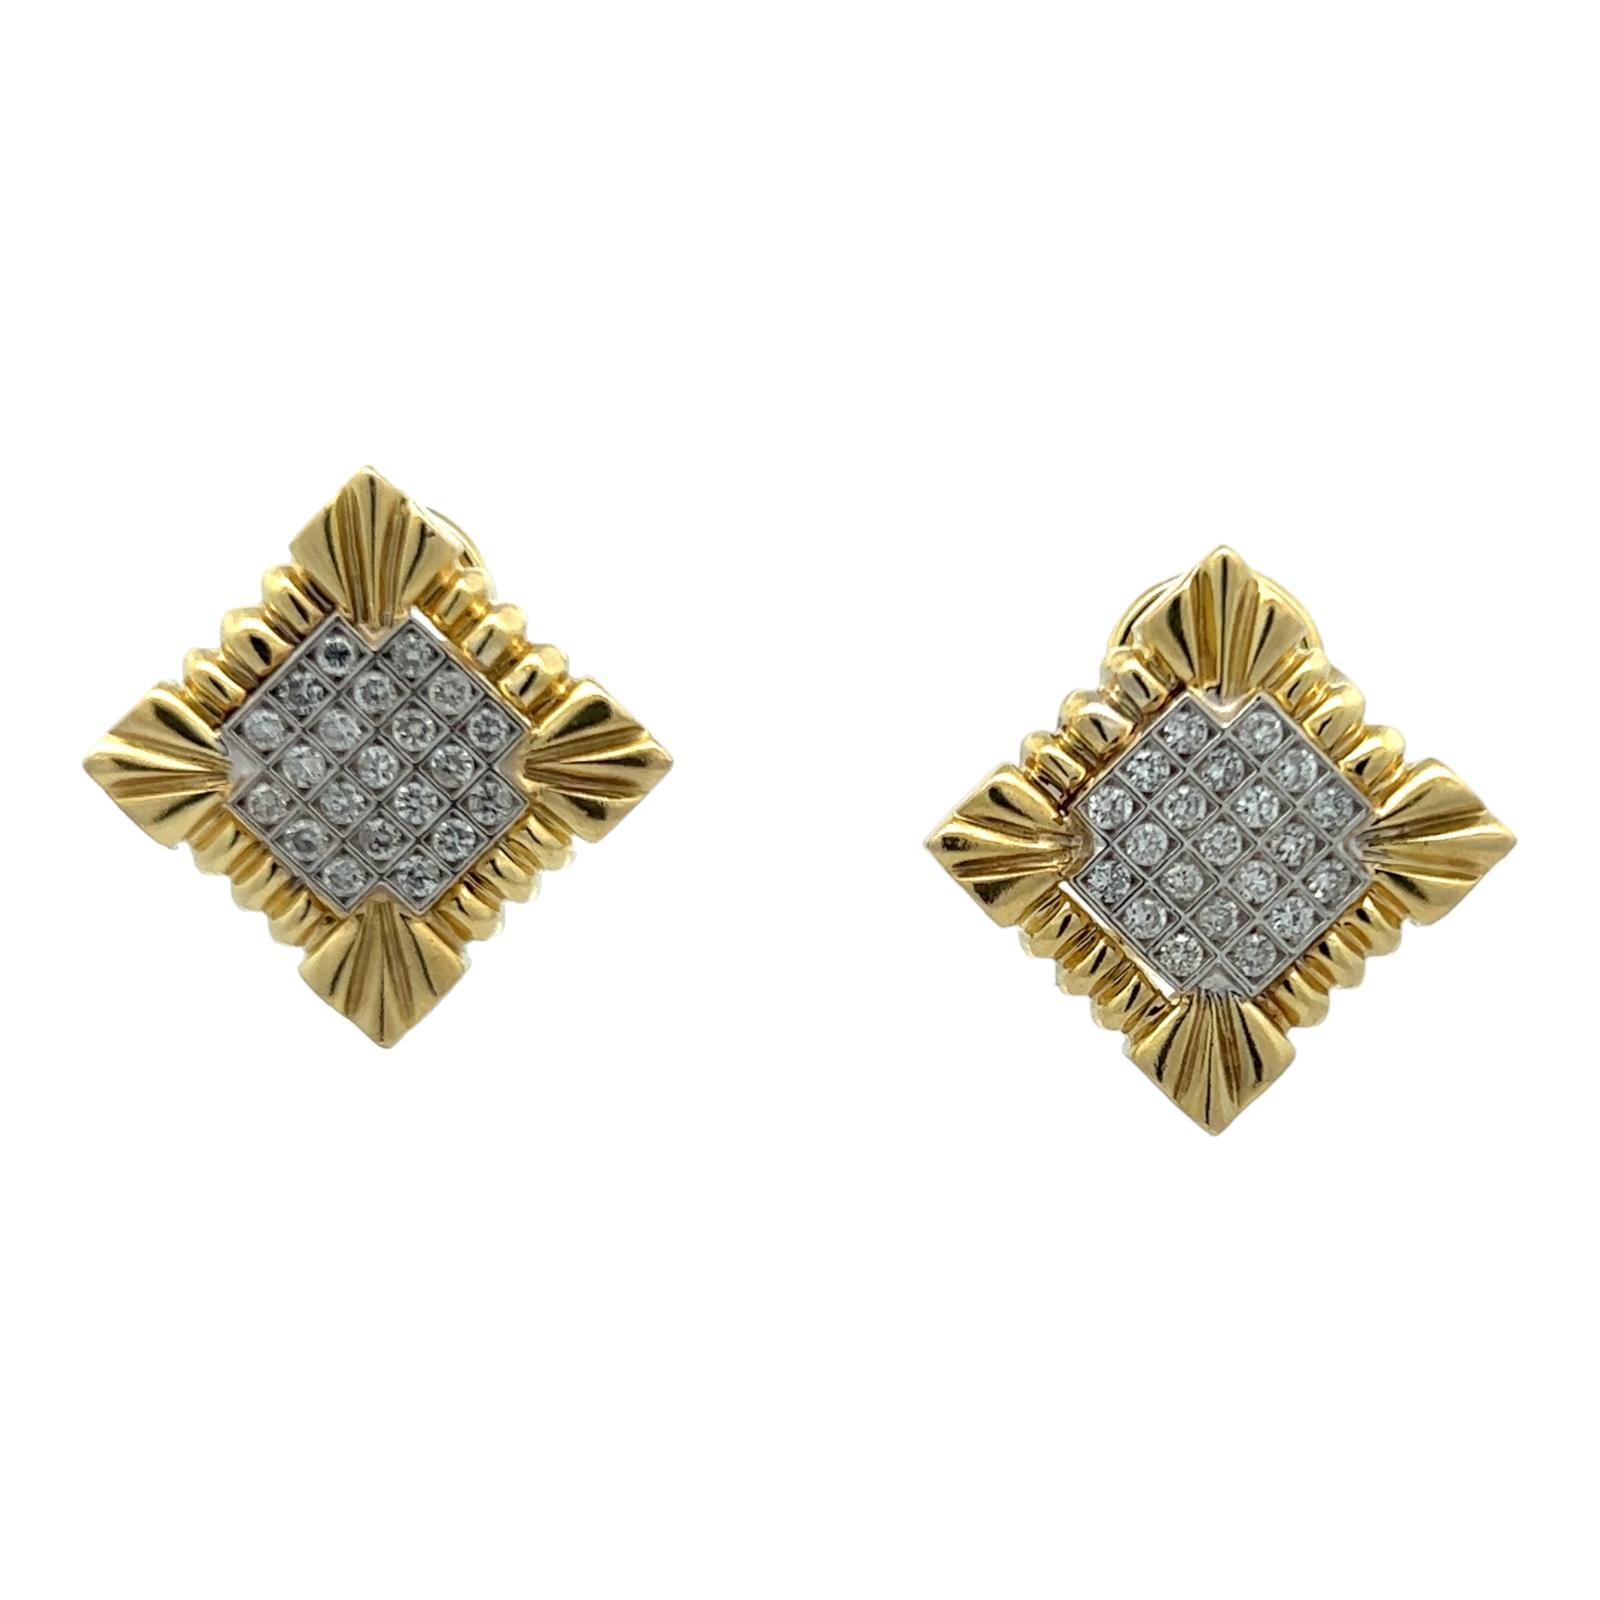 Beautiful diamond square fluted earrings fashioned in 14 karat white and yellow gold. The earrings feature 42 round brilliant cut diamonds weighing approximately .82 carat total weight. The diamonds are graded G-H color and SI clarity. They measure